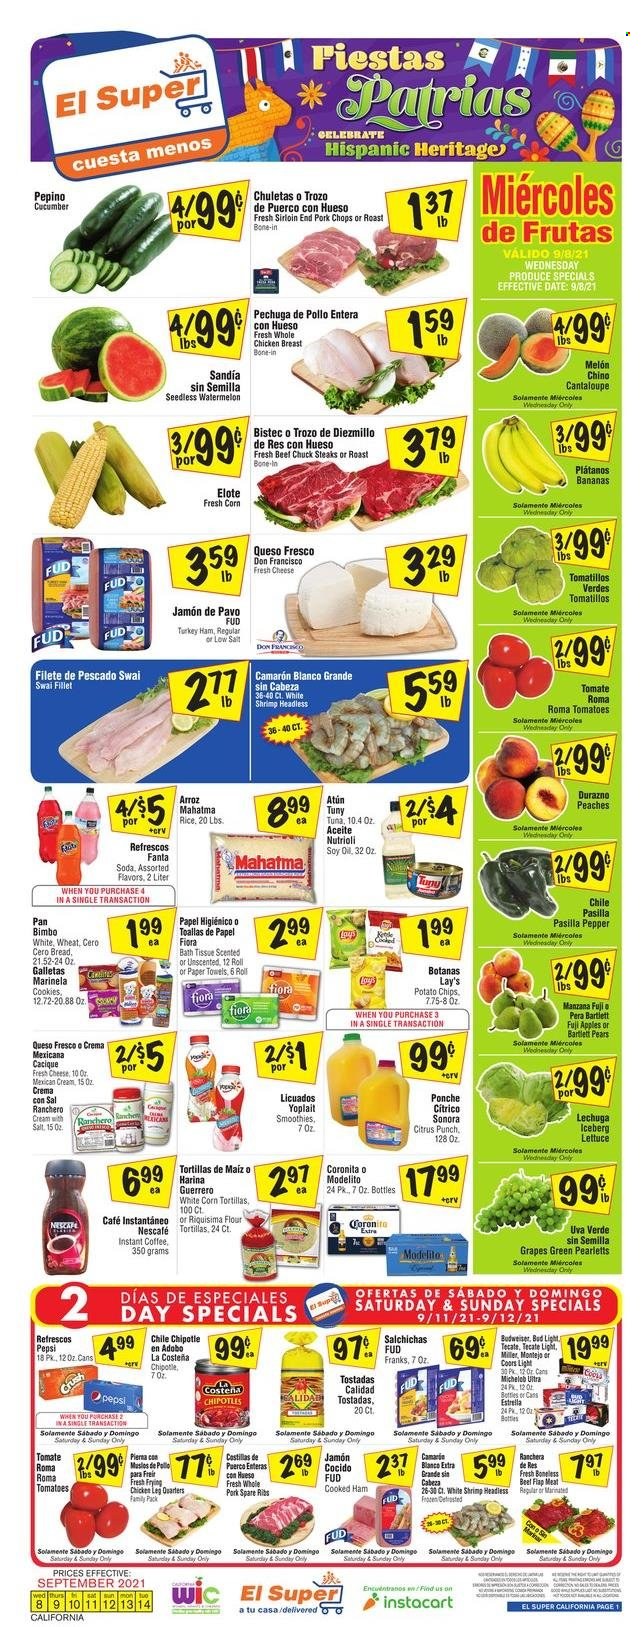 thumbnail - El Super Flyer - 09/08/2021 - 09/14/2021 - Sales products - Bartlett pears, corn tortillas, tortillas, tostadas, cantaloupe, tomatillo, tomatoes, lettuce, apples, bananas, grapes, watermelon, pears, Fuji apple, shrimps, swai fillet, cooked ham, ham, queso fresco, cheese, Yoplait, cookies, potato chips, chips, Lay’s, adobo sauce, Pepsi, Fanta, fruit punch, smoothie, soda, instant coffee, Nescafé, beer, Bud Light, Miller, whole chicken, chicken breasts, chicken legs, steak, pork chops, pork meat, pork spare ribs, Budweiser, melons, peaches, pasilla. Page 1.